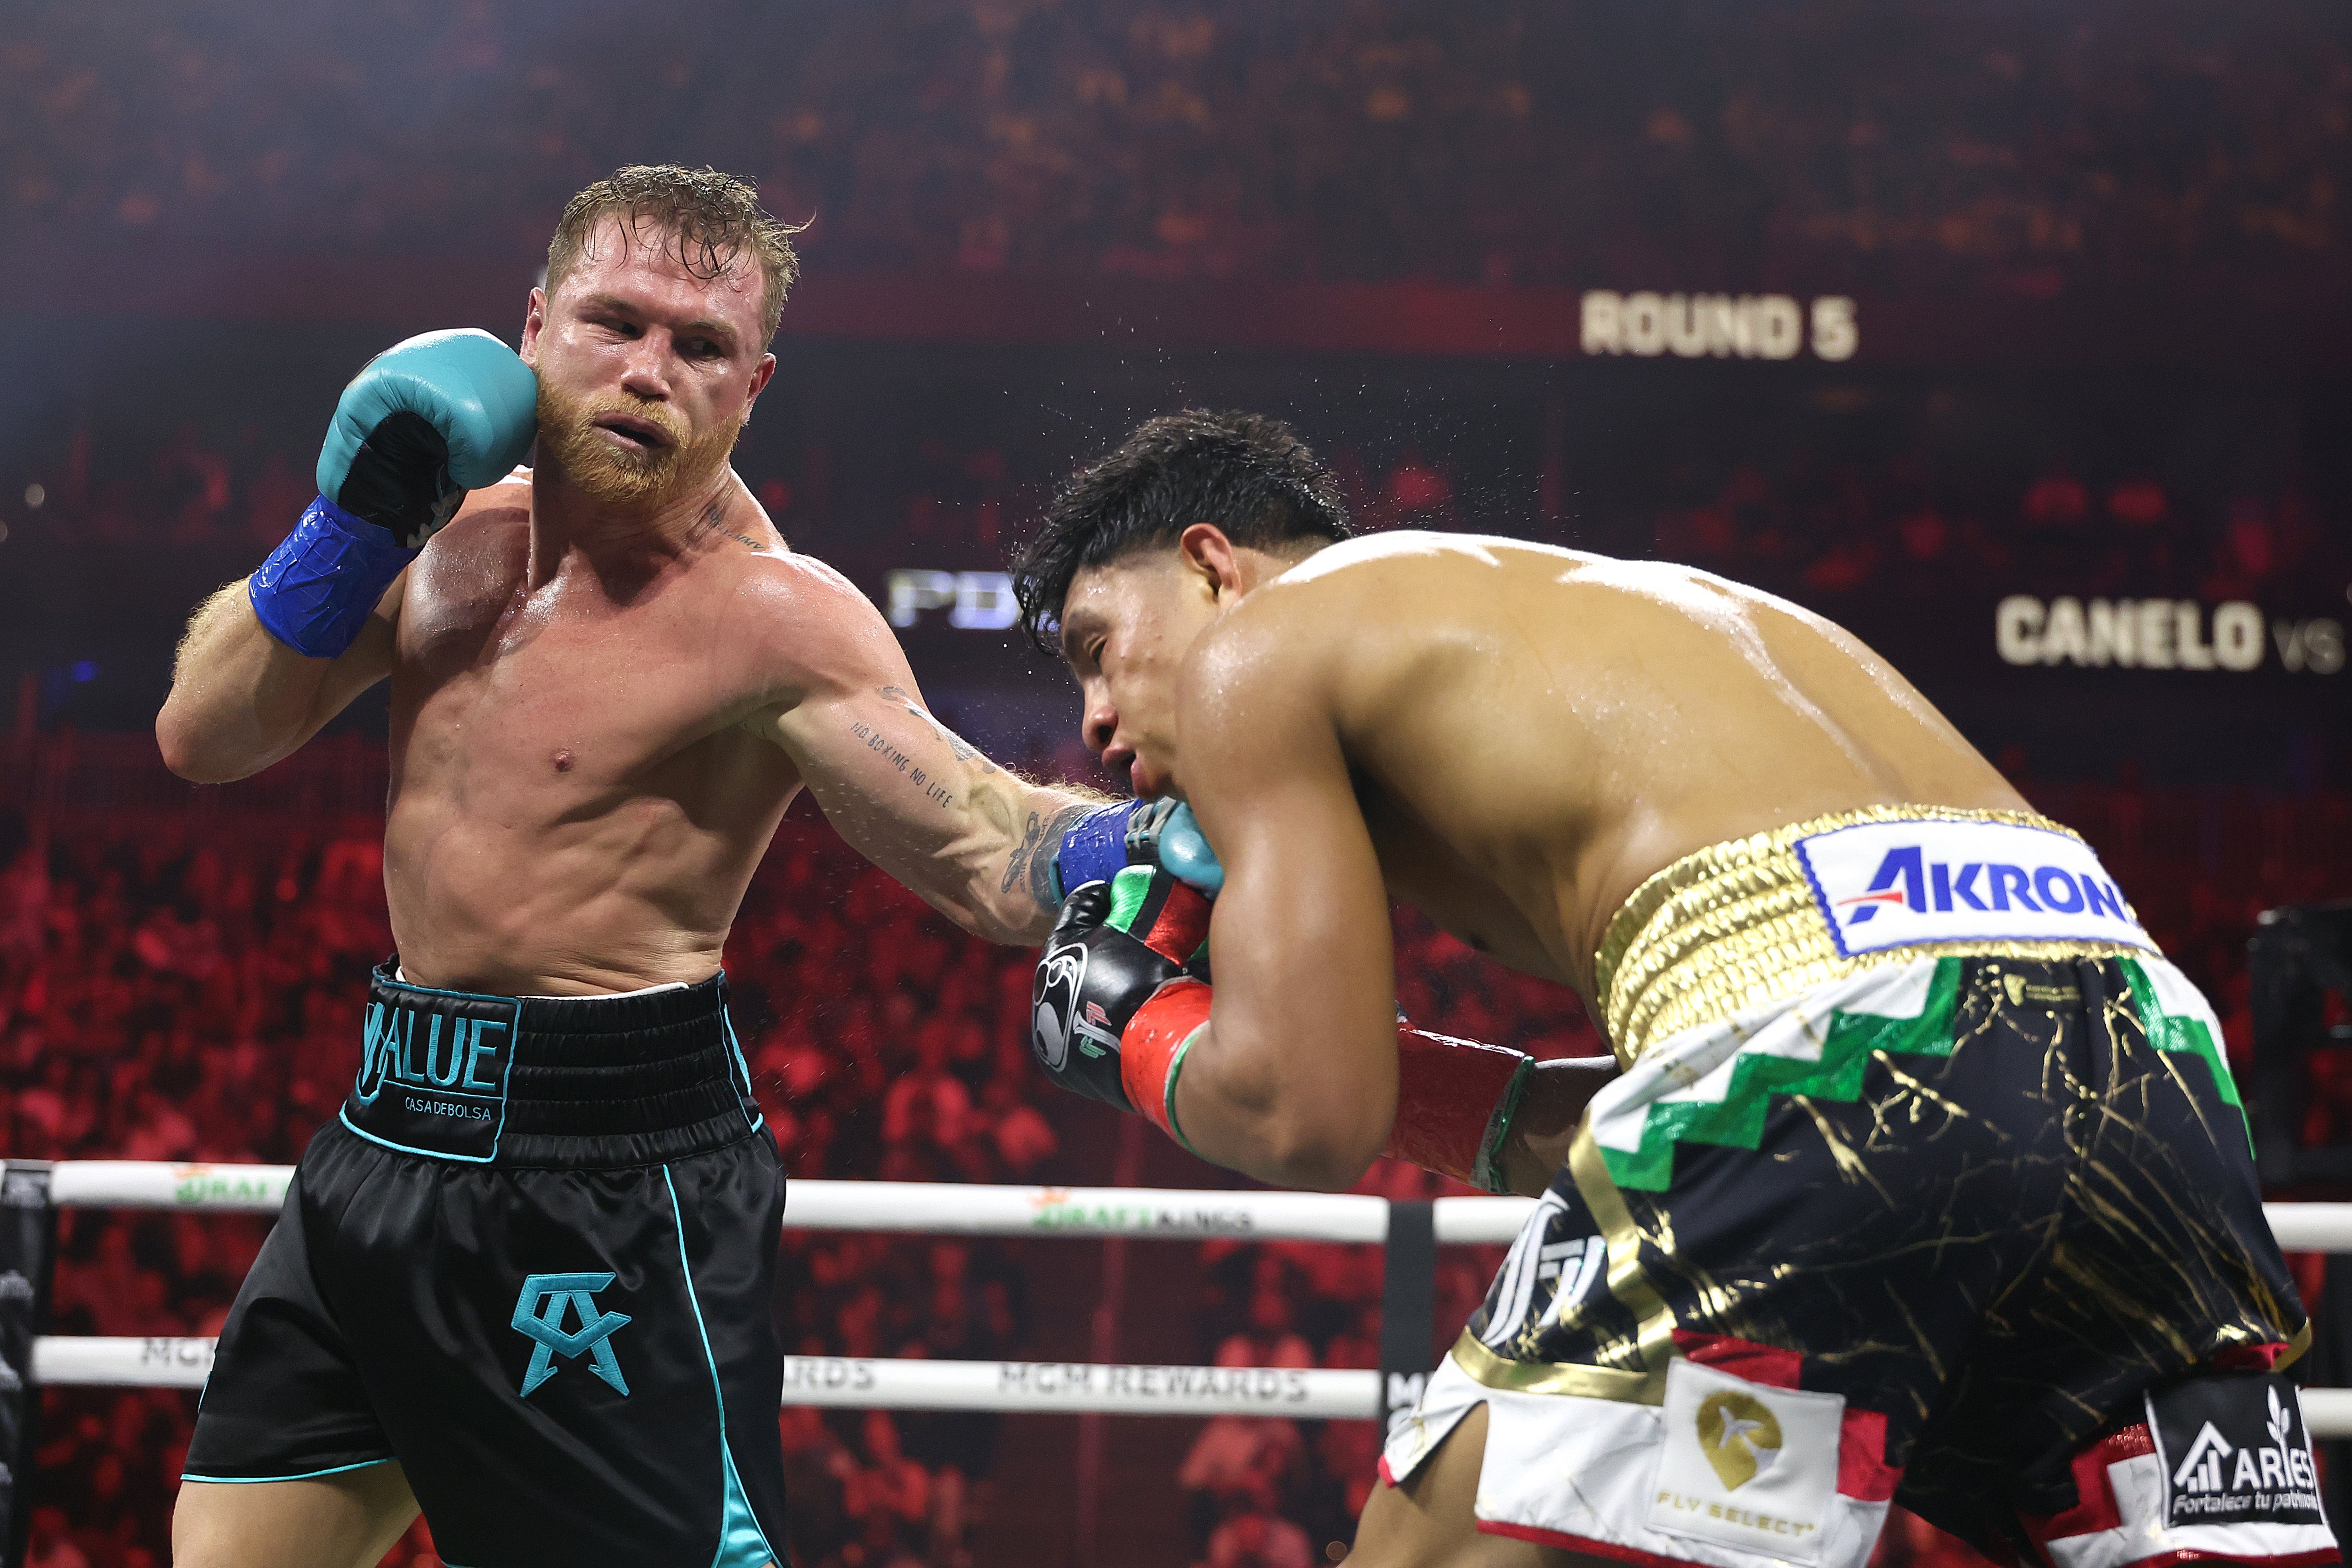 Canelo remained the undisputed super-middleweight champion in Las Vegas